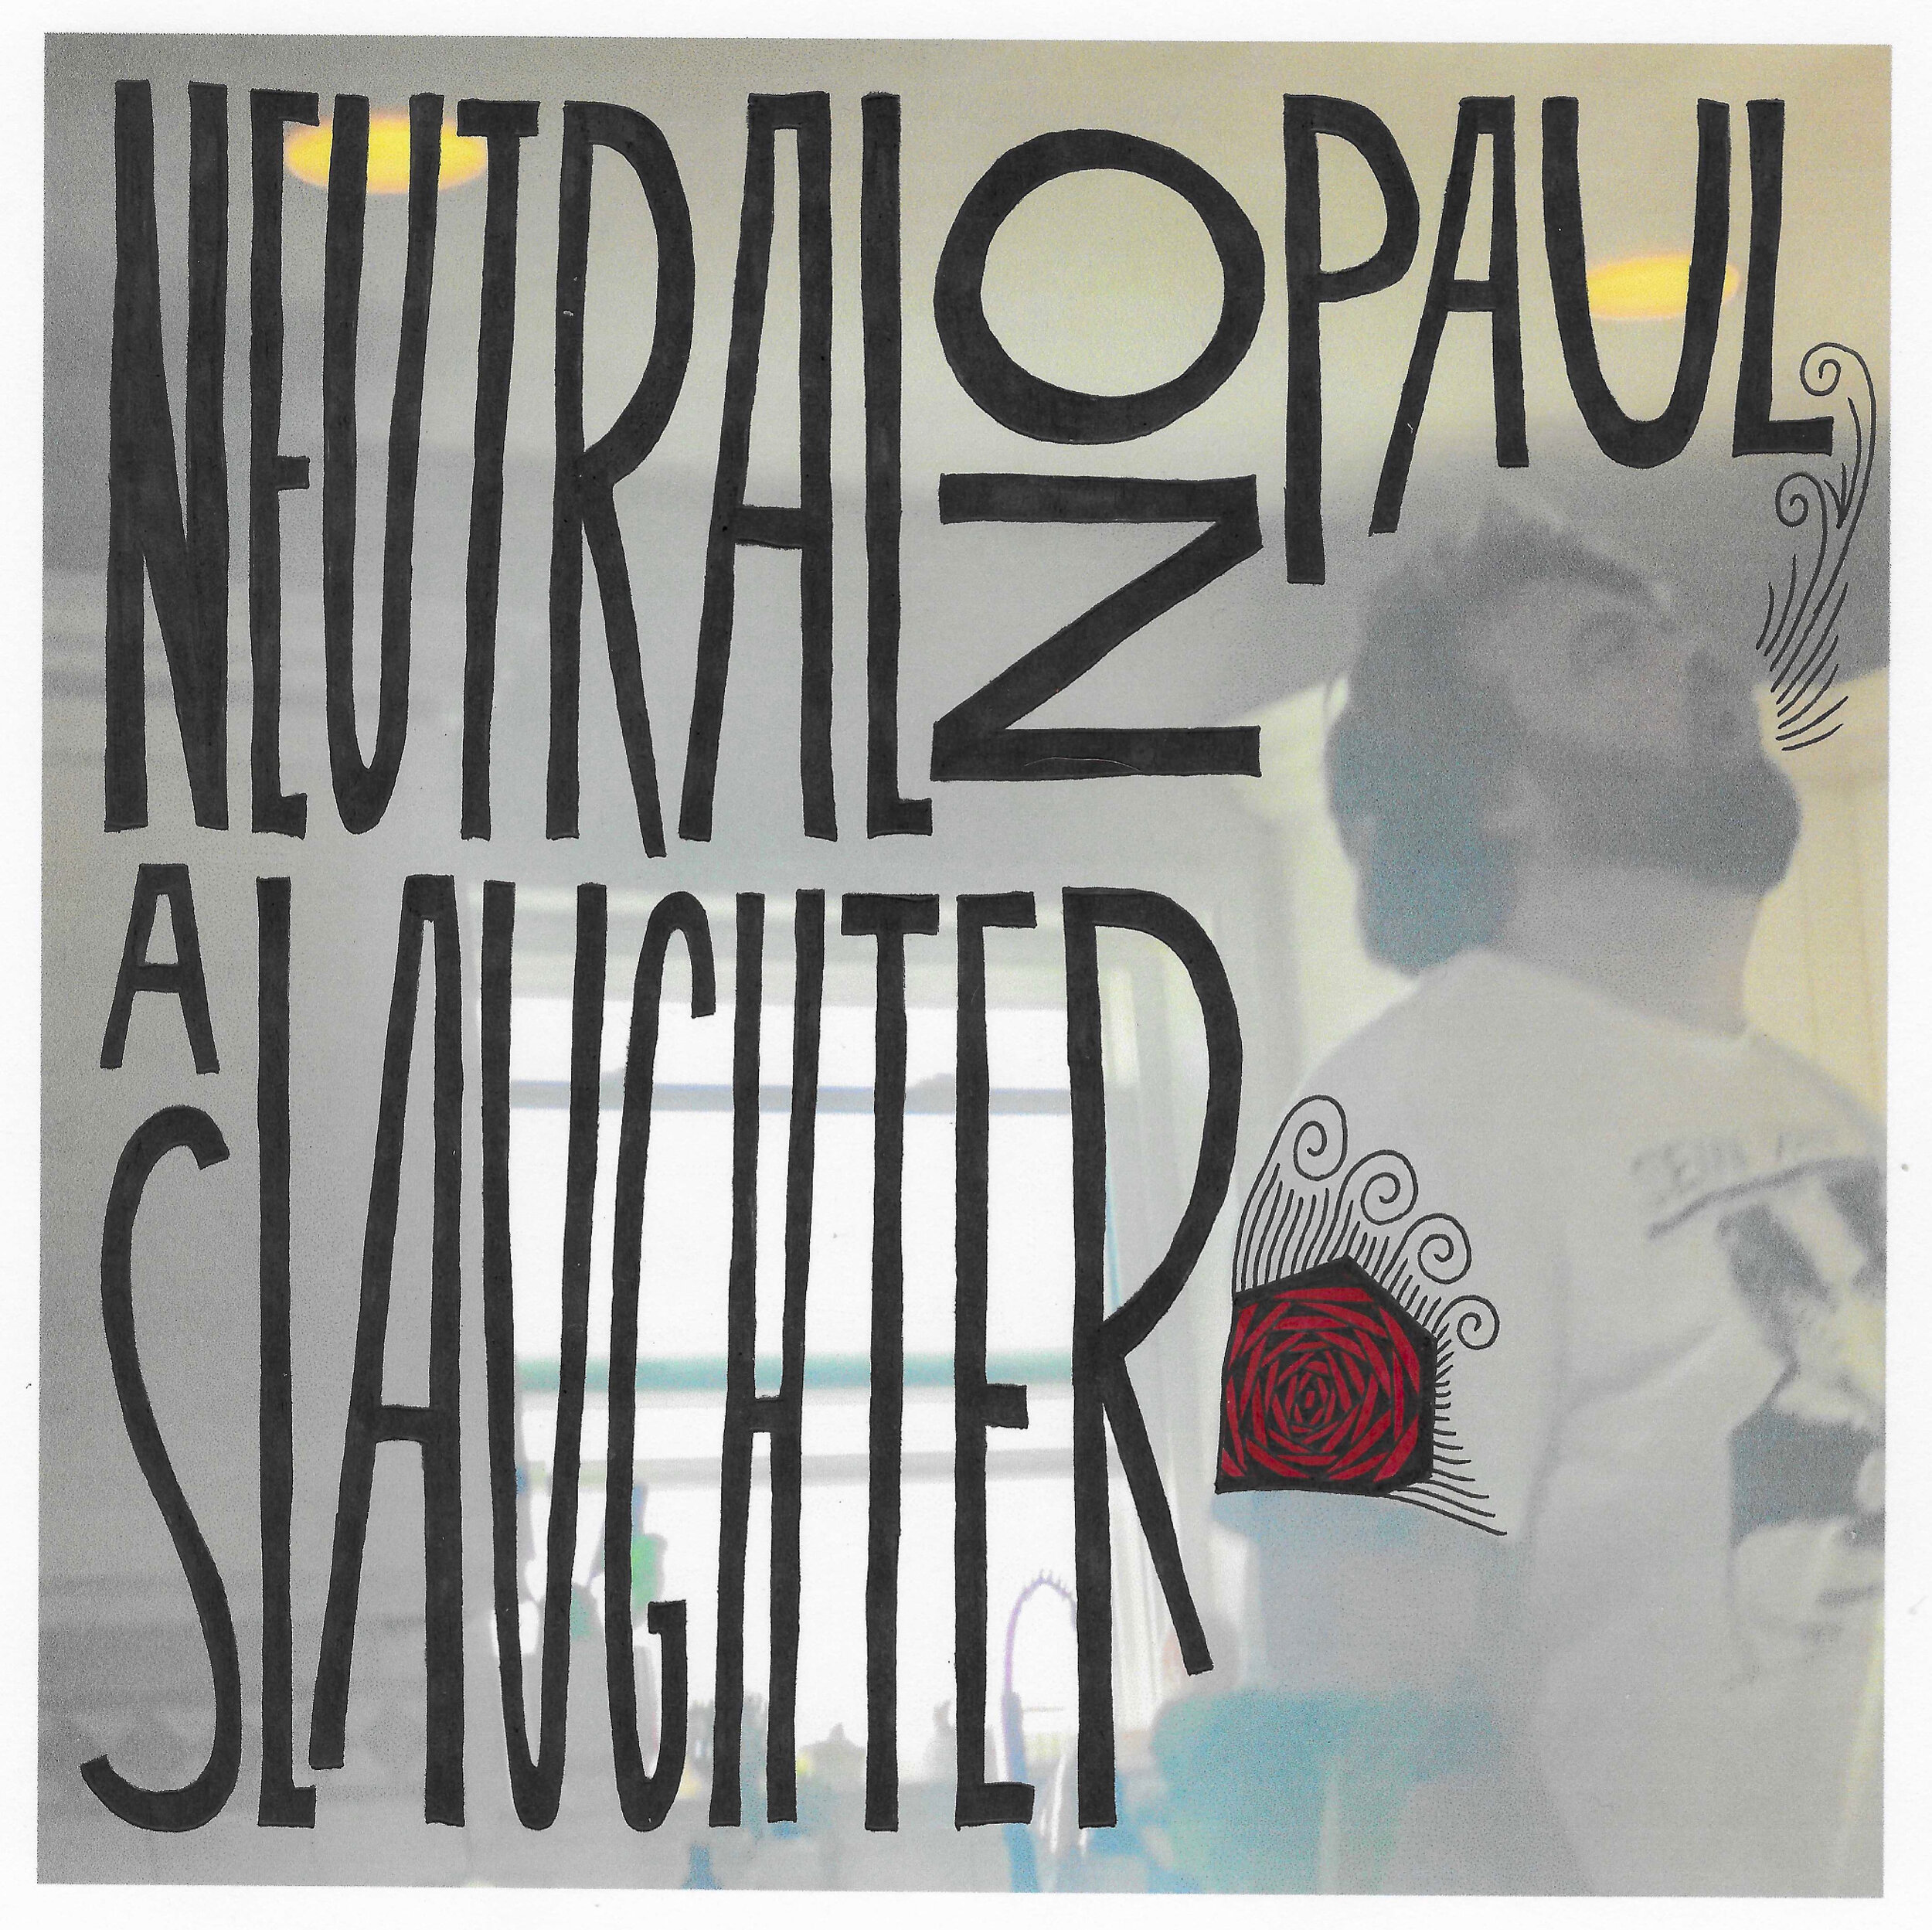 Neutral On Paul "A Slaughter" Single Cover